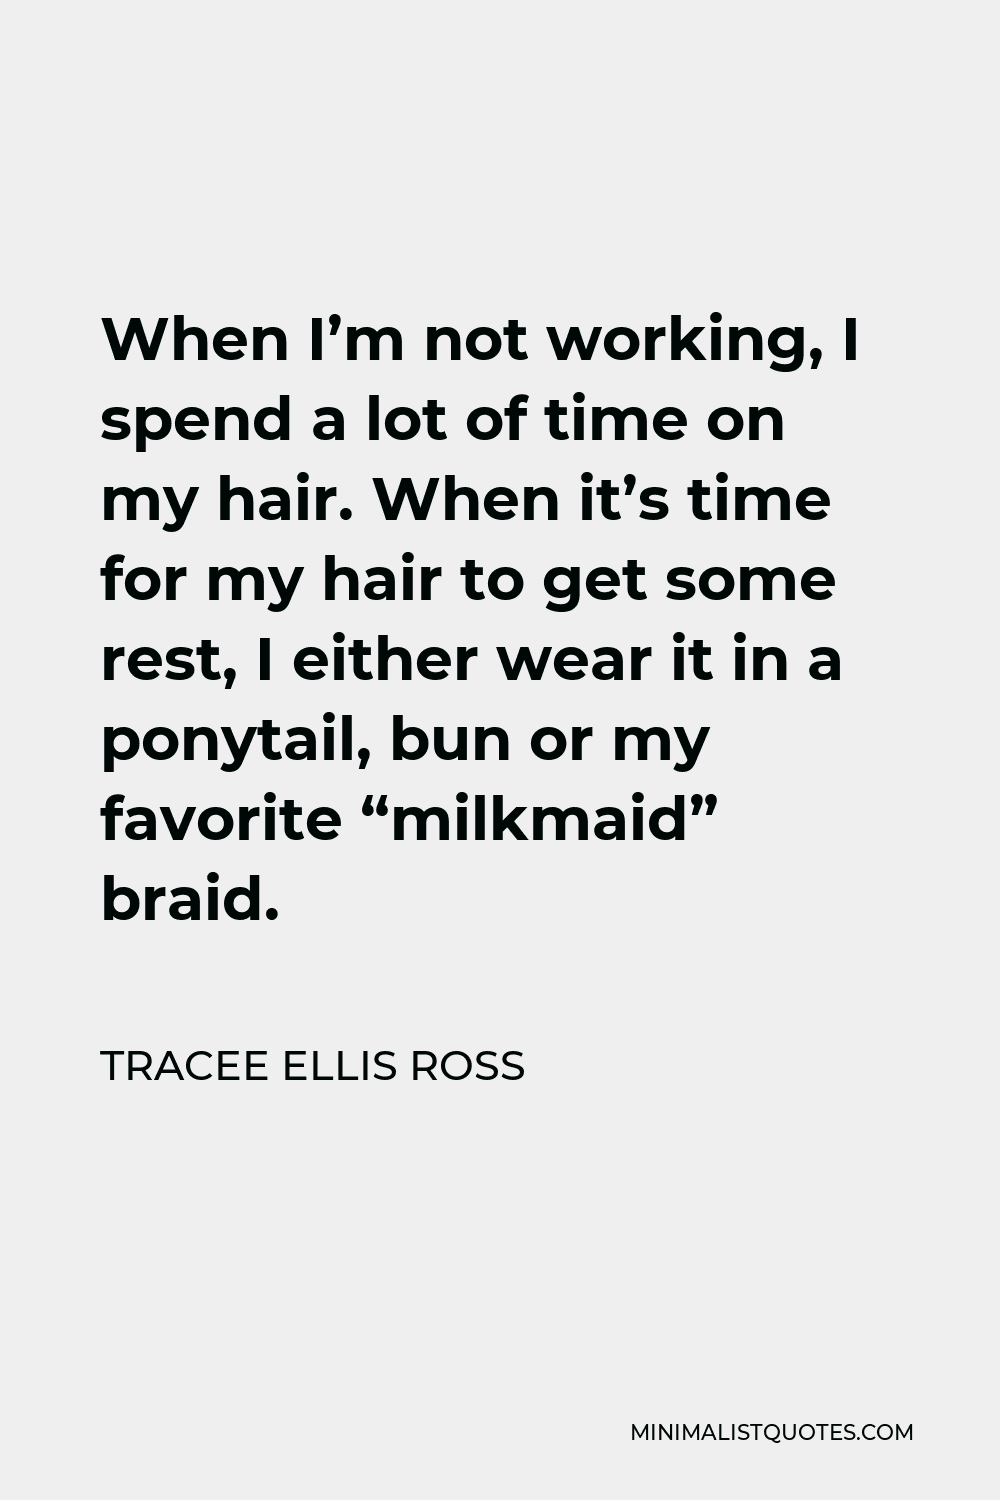 Tracee Ellis Ross Quote - When I’m not working, I spend a lot of time on my hair. When it’s time for my hair to get some rest, I either wear it in a ponytail, bun or my favorite “milkmaid” braid.